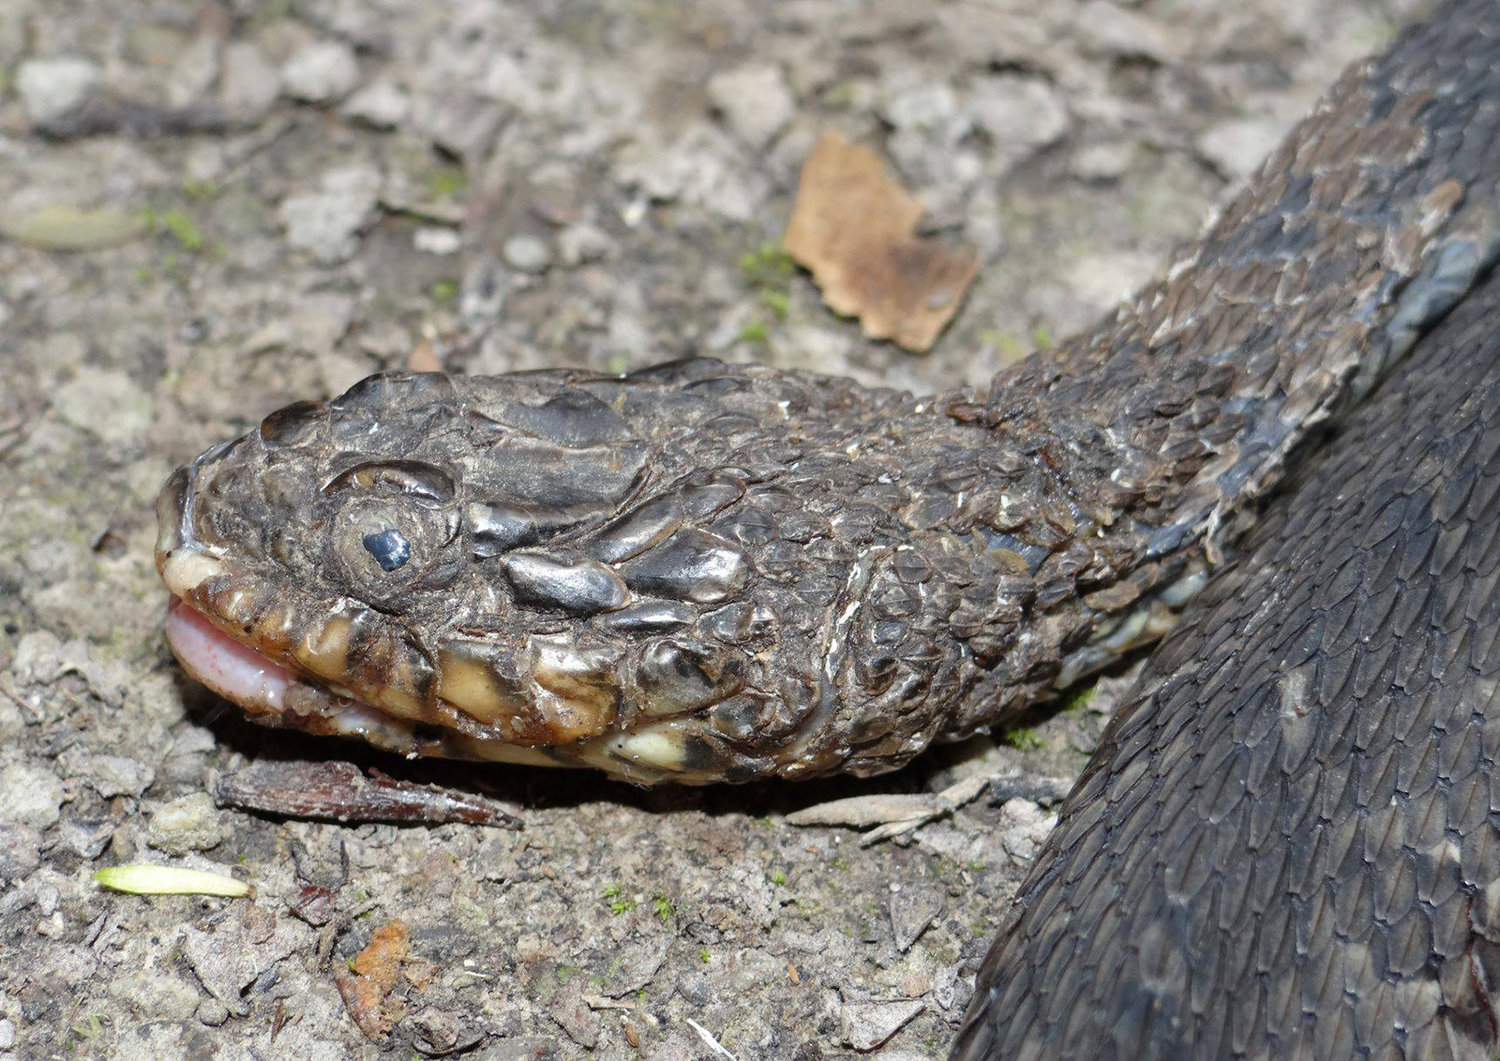 This is a plain-bellied watersnake that has been afflicted with the disease. It was found in Louisiana. (Brad "Bones" Glorioso/USGS Wetland and Aquatic Research Center/TNS)